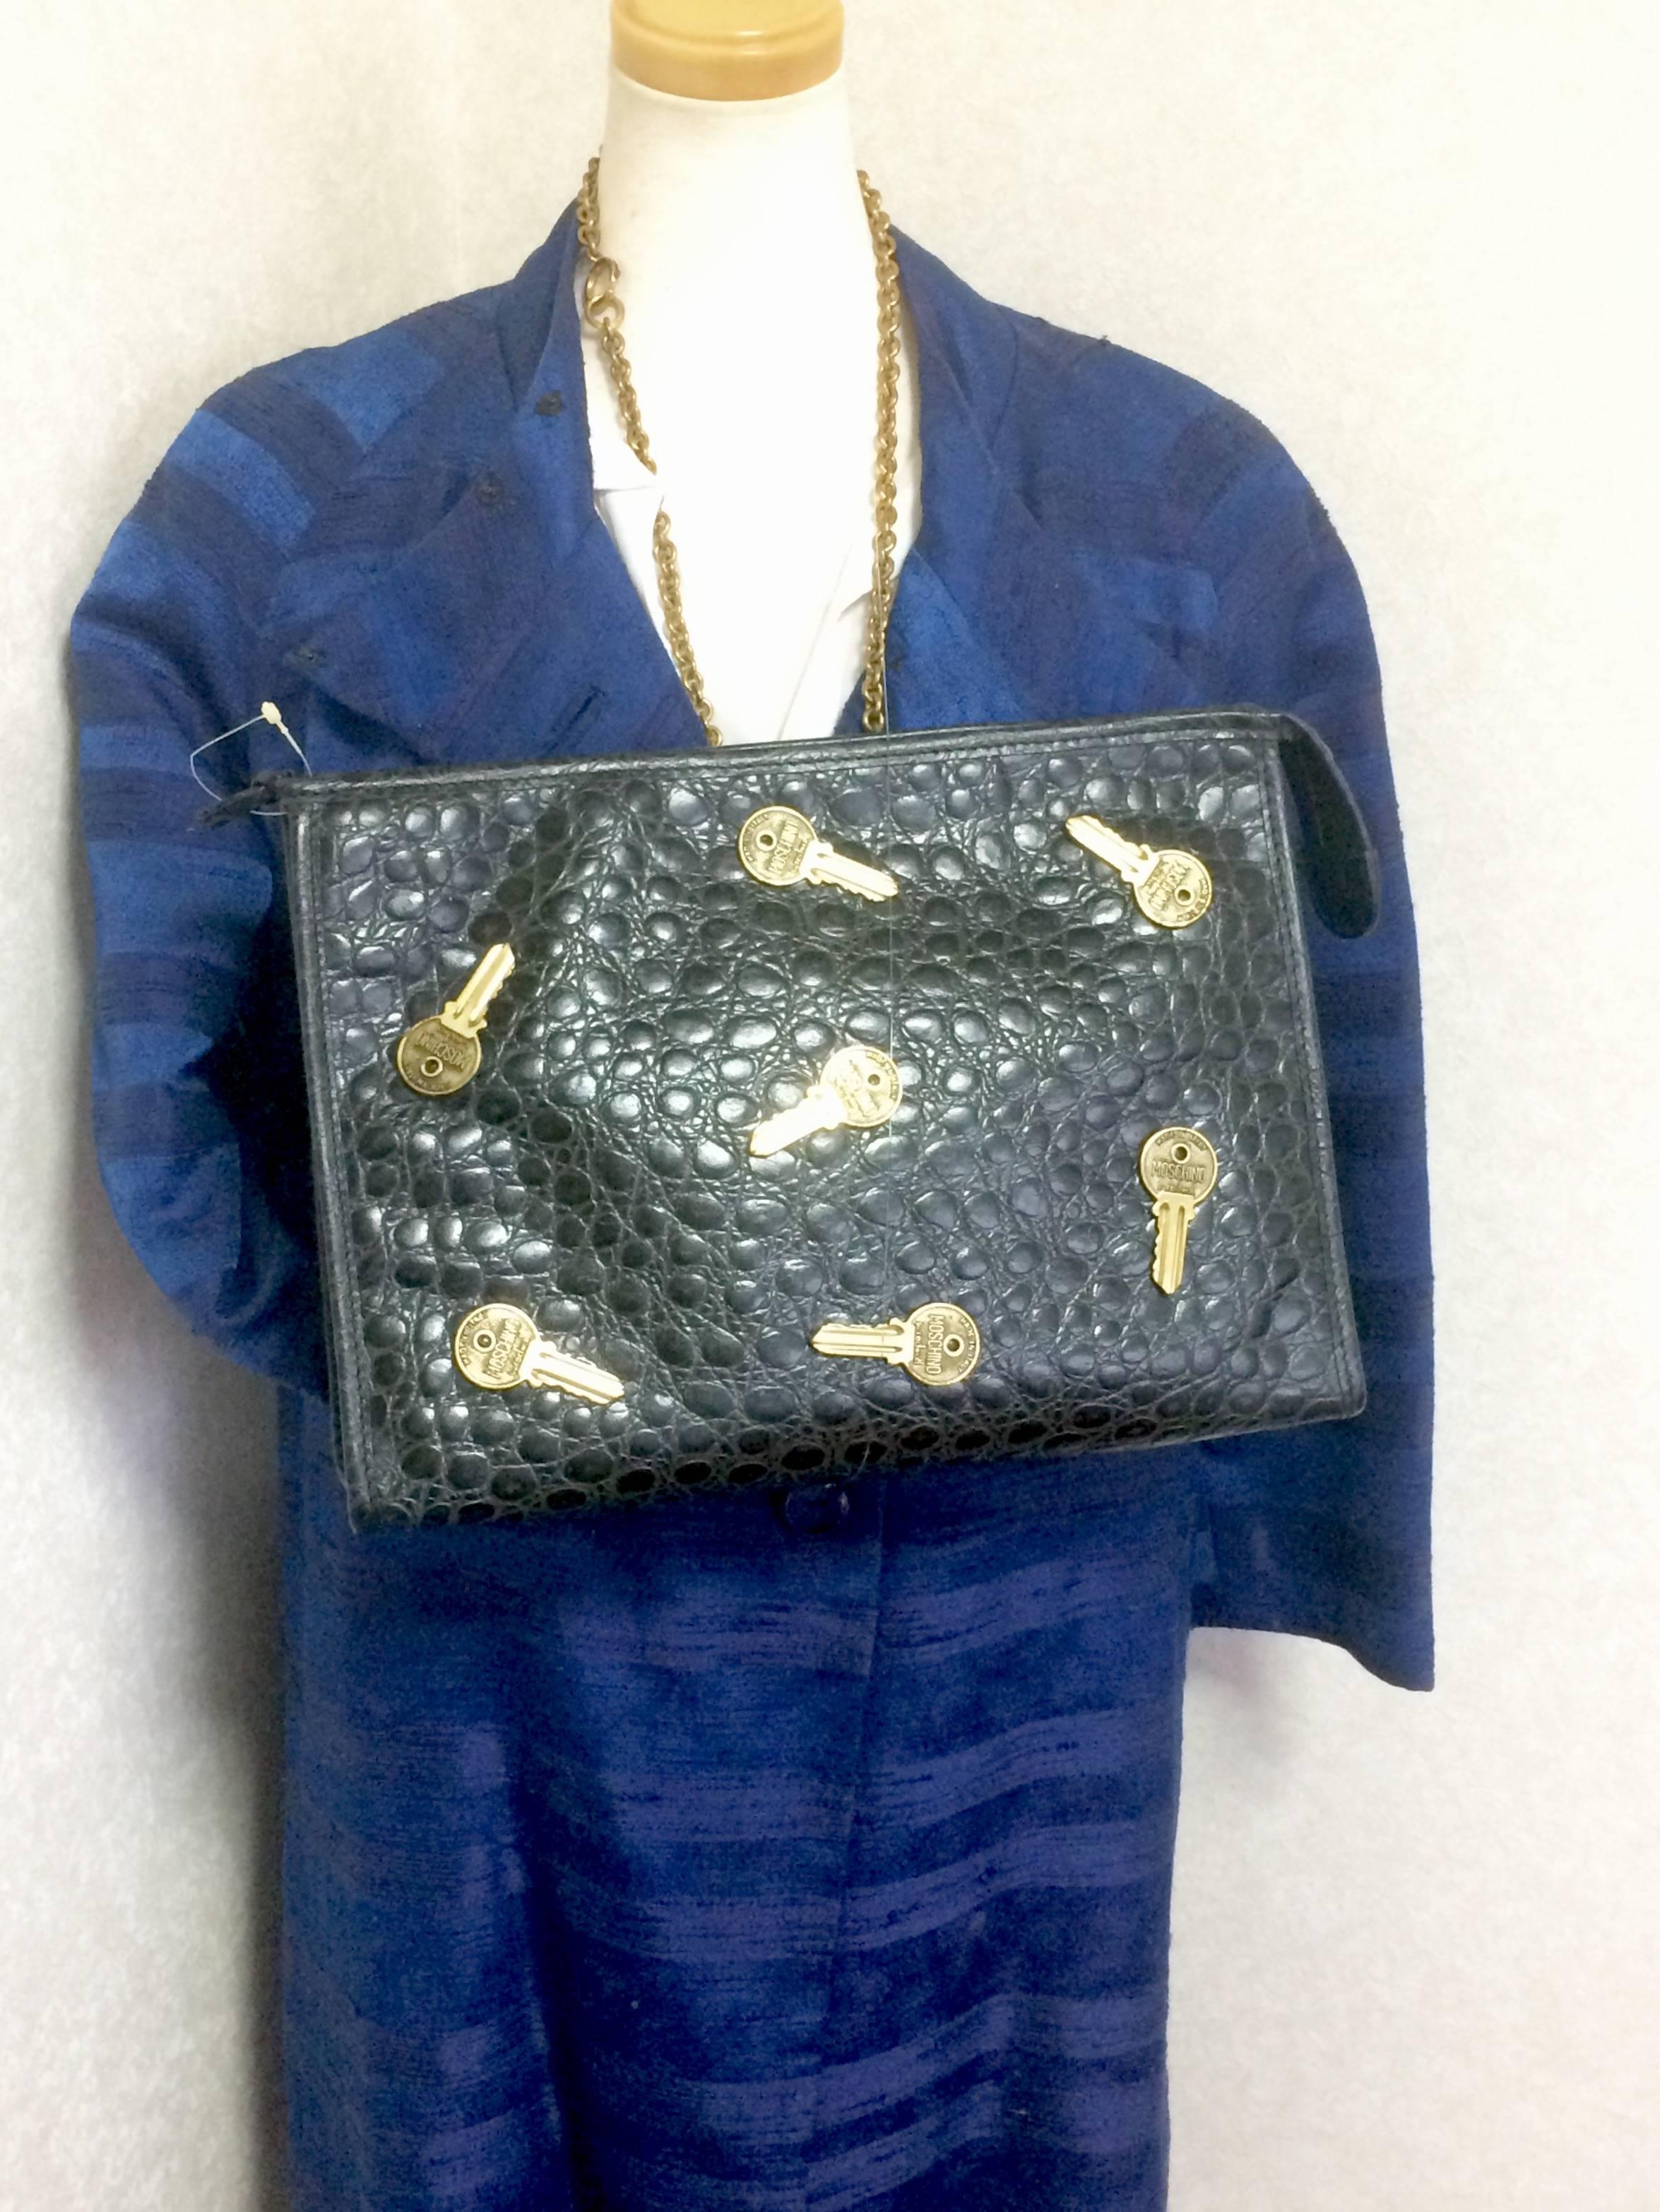 1990s. Vintage MOSCHINO classic croc-embossed black leather clutch bag with key logo motifs all over. Masterpiece produced by Red Wall.

This is one of the coolest masterpieces produced by Red Wall, made in Italy. 
Can be unisex use.

Cute vintage